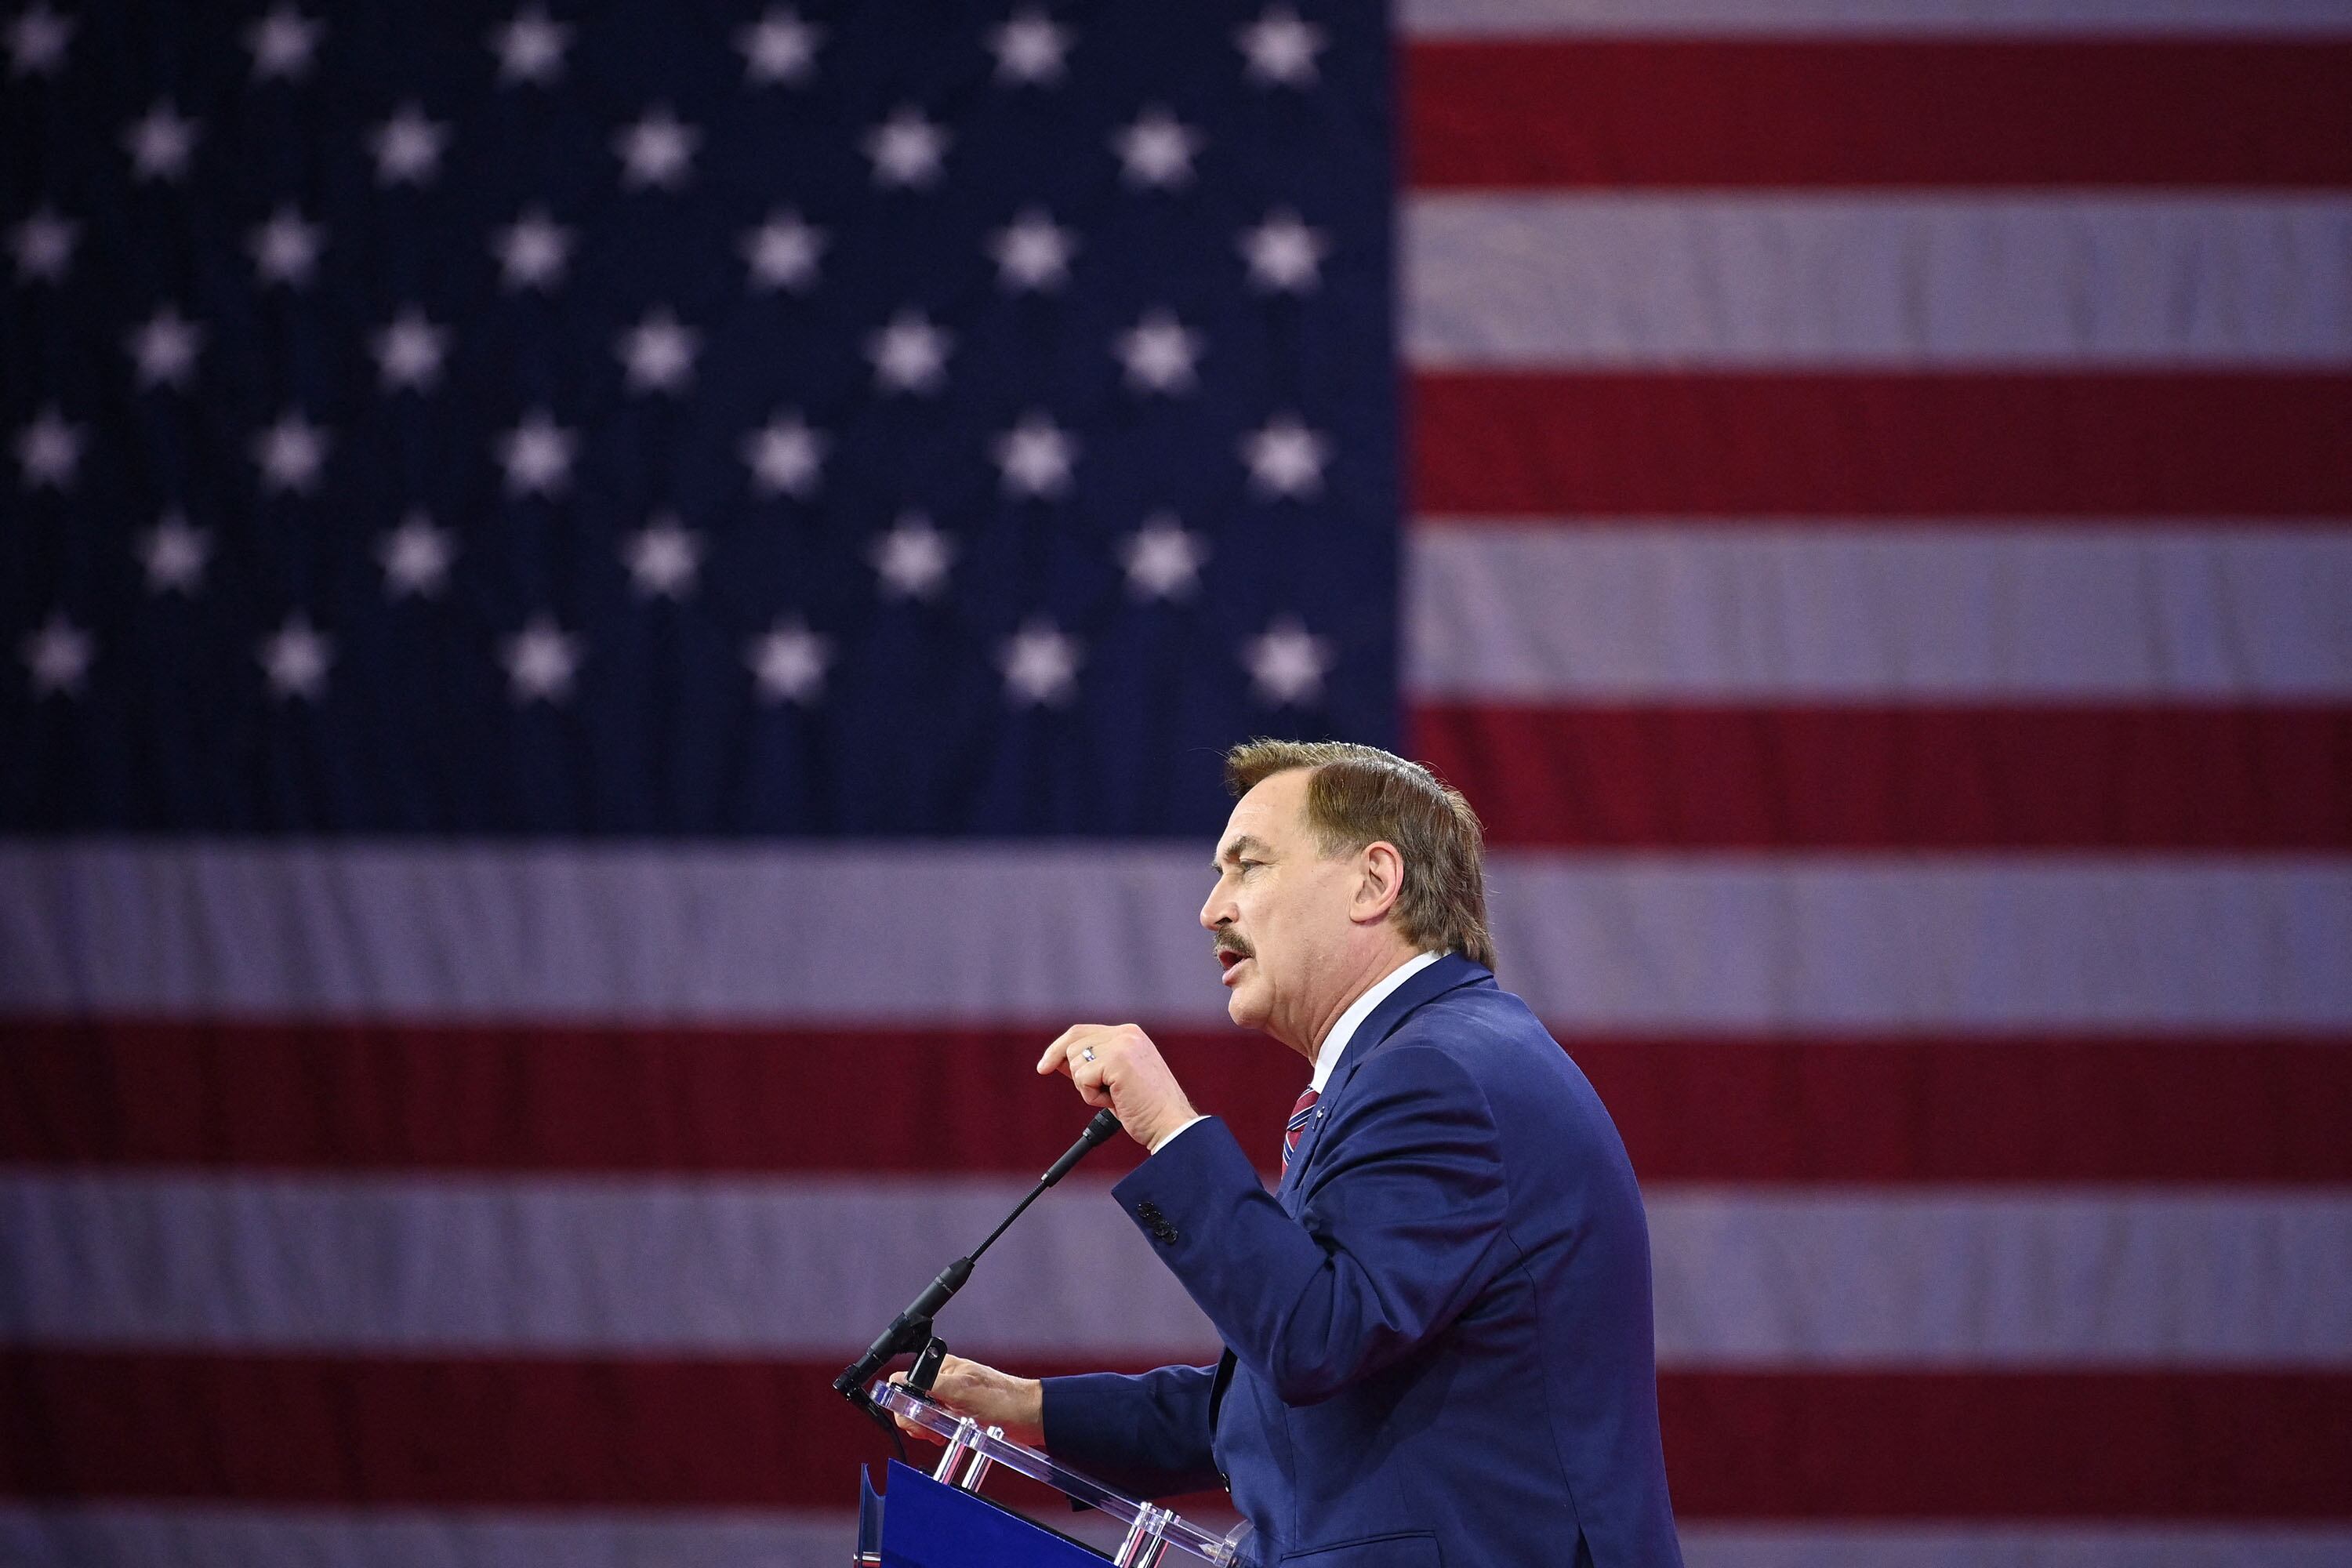 A profile photo of a man with short brown hair and wearing a dark blue suit speaks at a podium with a giant American flag taking up the whole background.